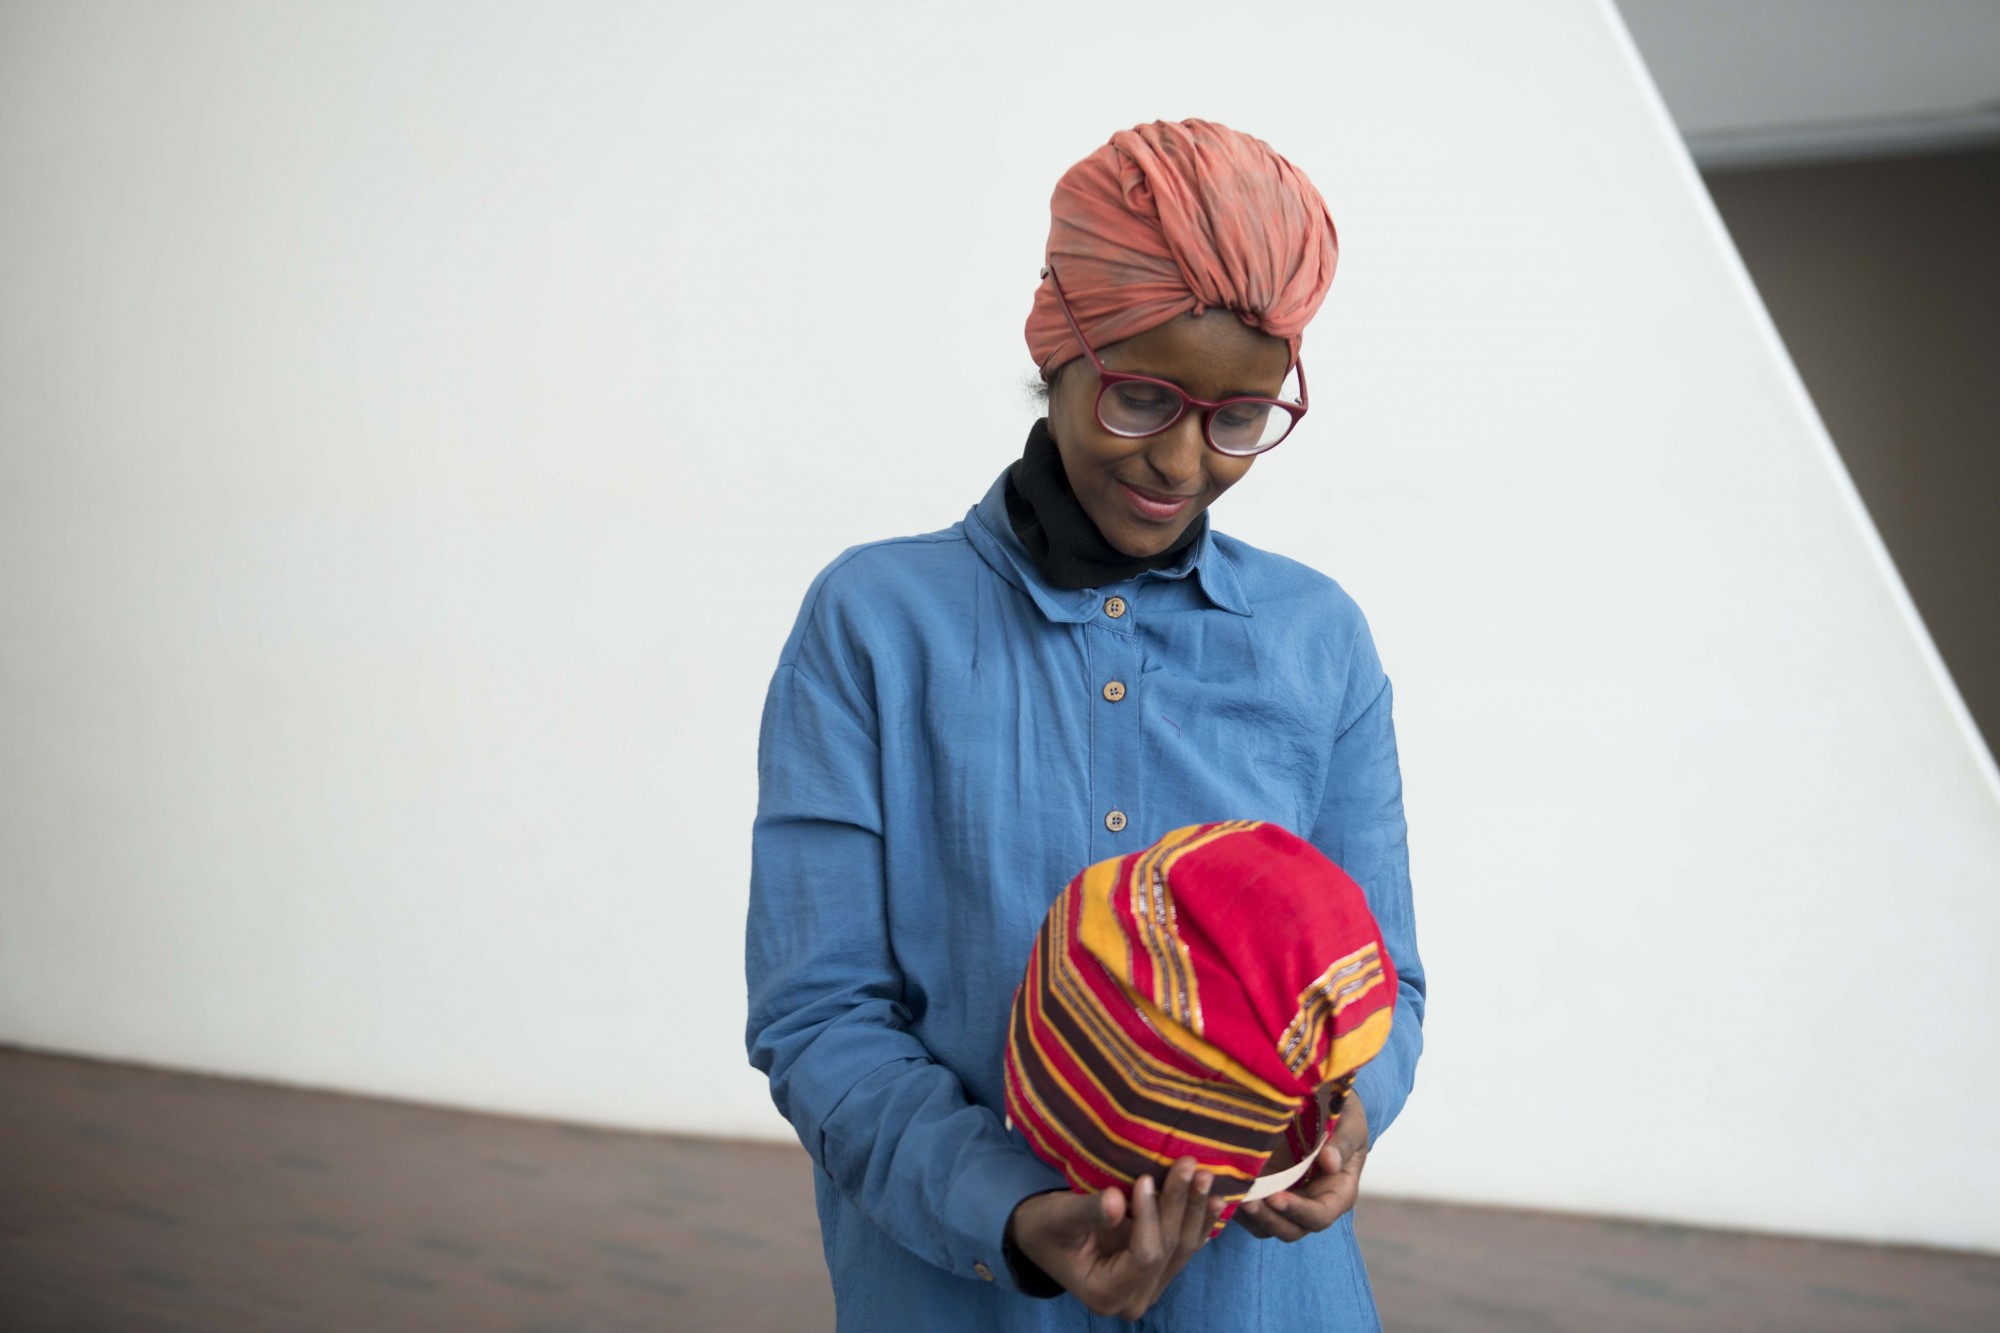 Artist and teacher Ifrah Mansour looks at a miniature Aqal, a traditional nomadic Somali hut, she created an exhibit she  hosted at the Walker Art Center on Saturday, Dec 7. A Somali refugee herself, Mansour aims to create art that promotes social justice. 